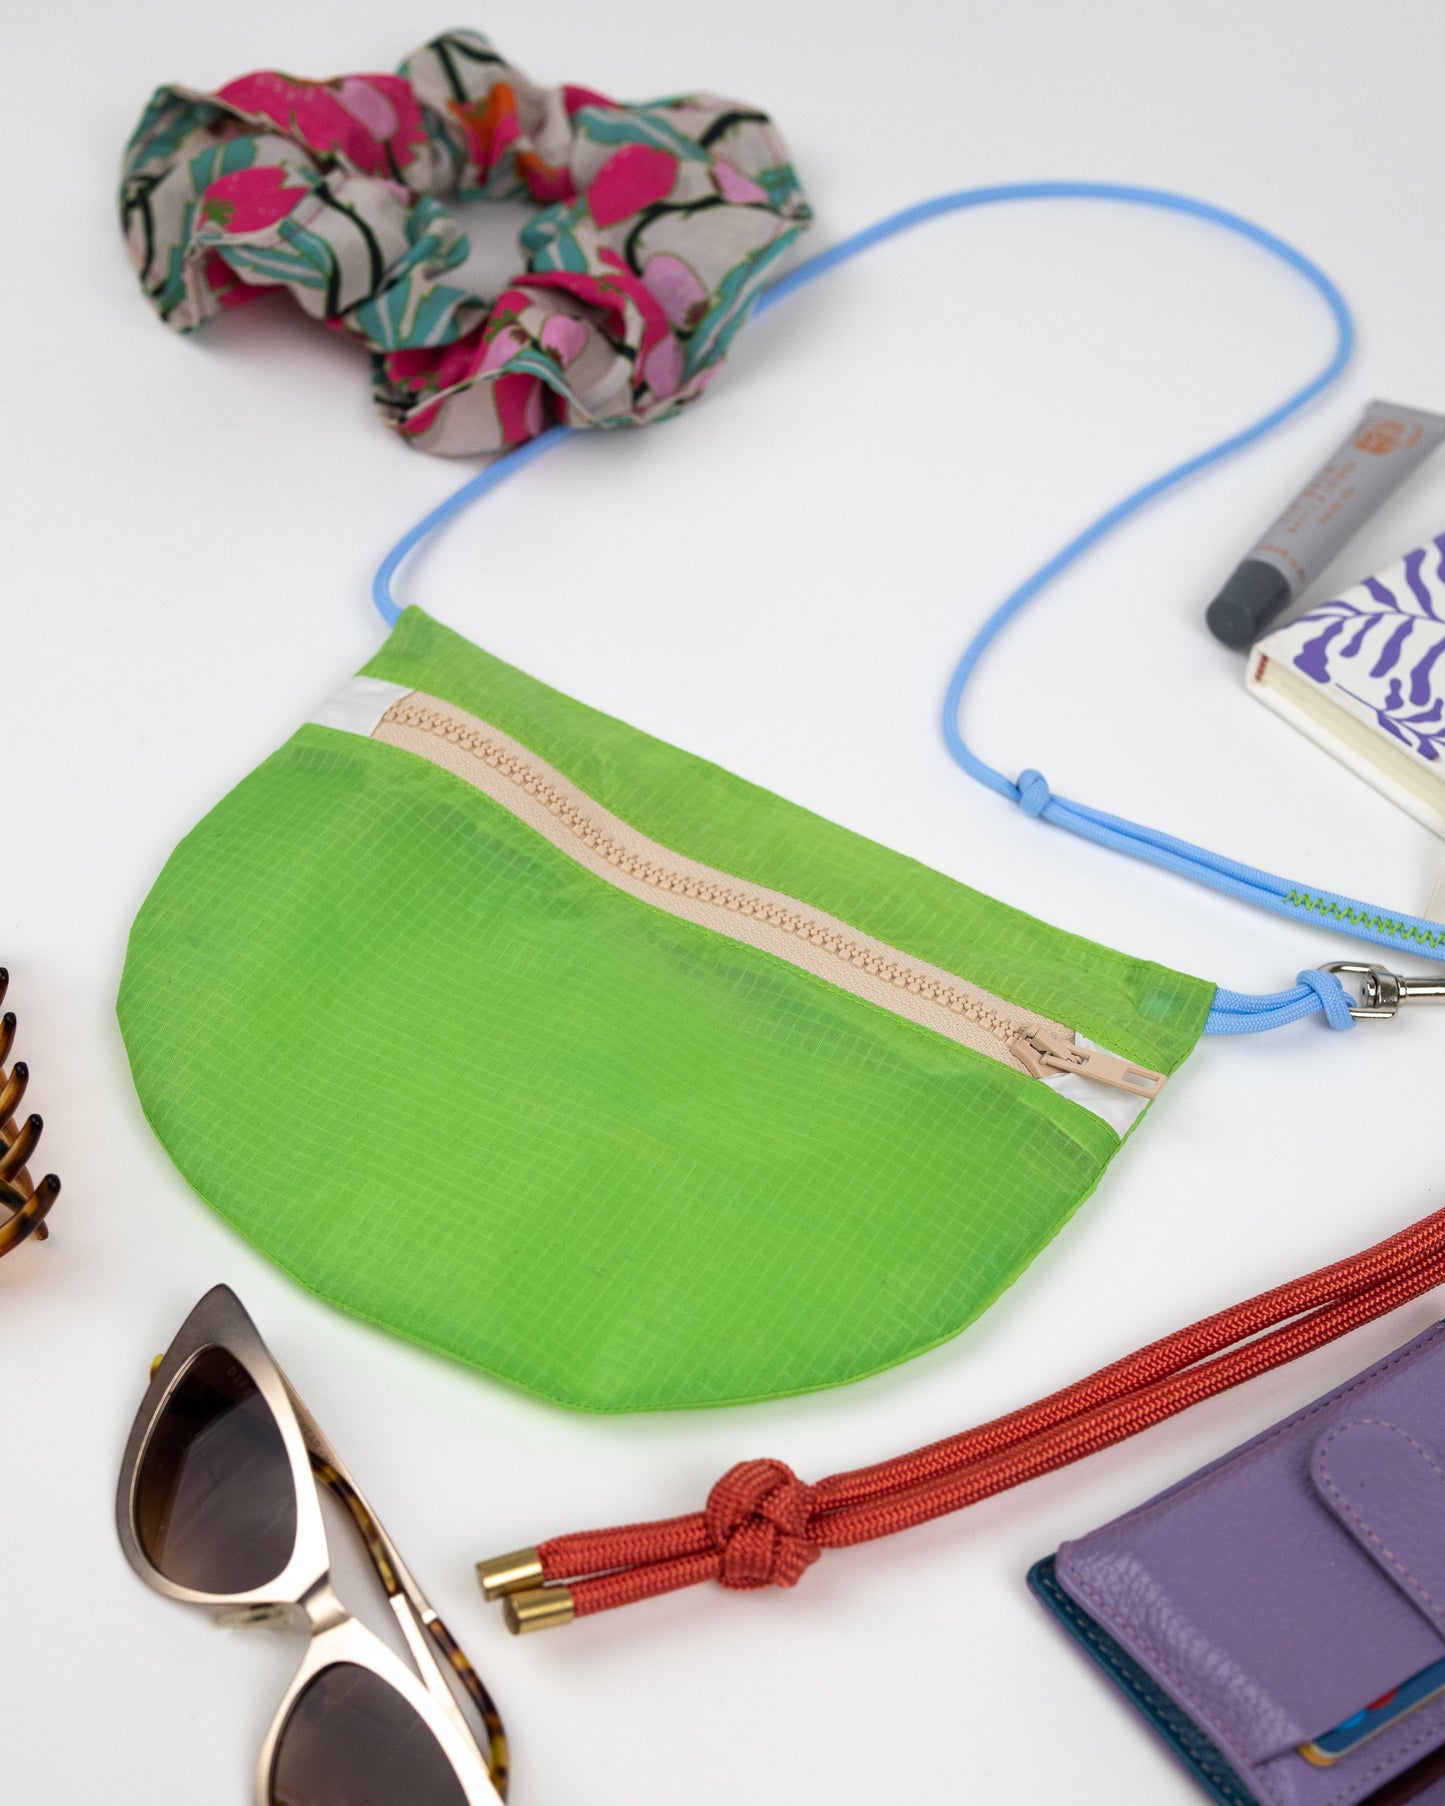 lime green and beige crossbody bag made from vintage paragliders called the U.BAG